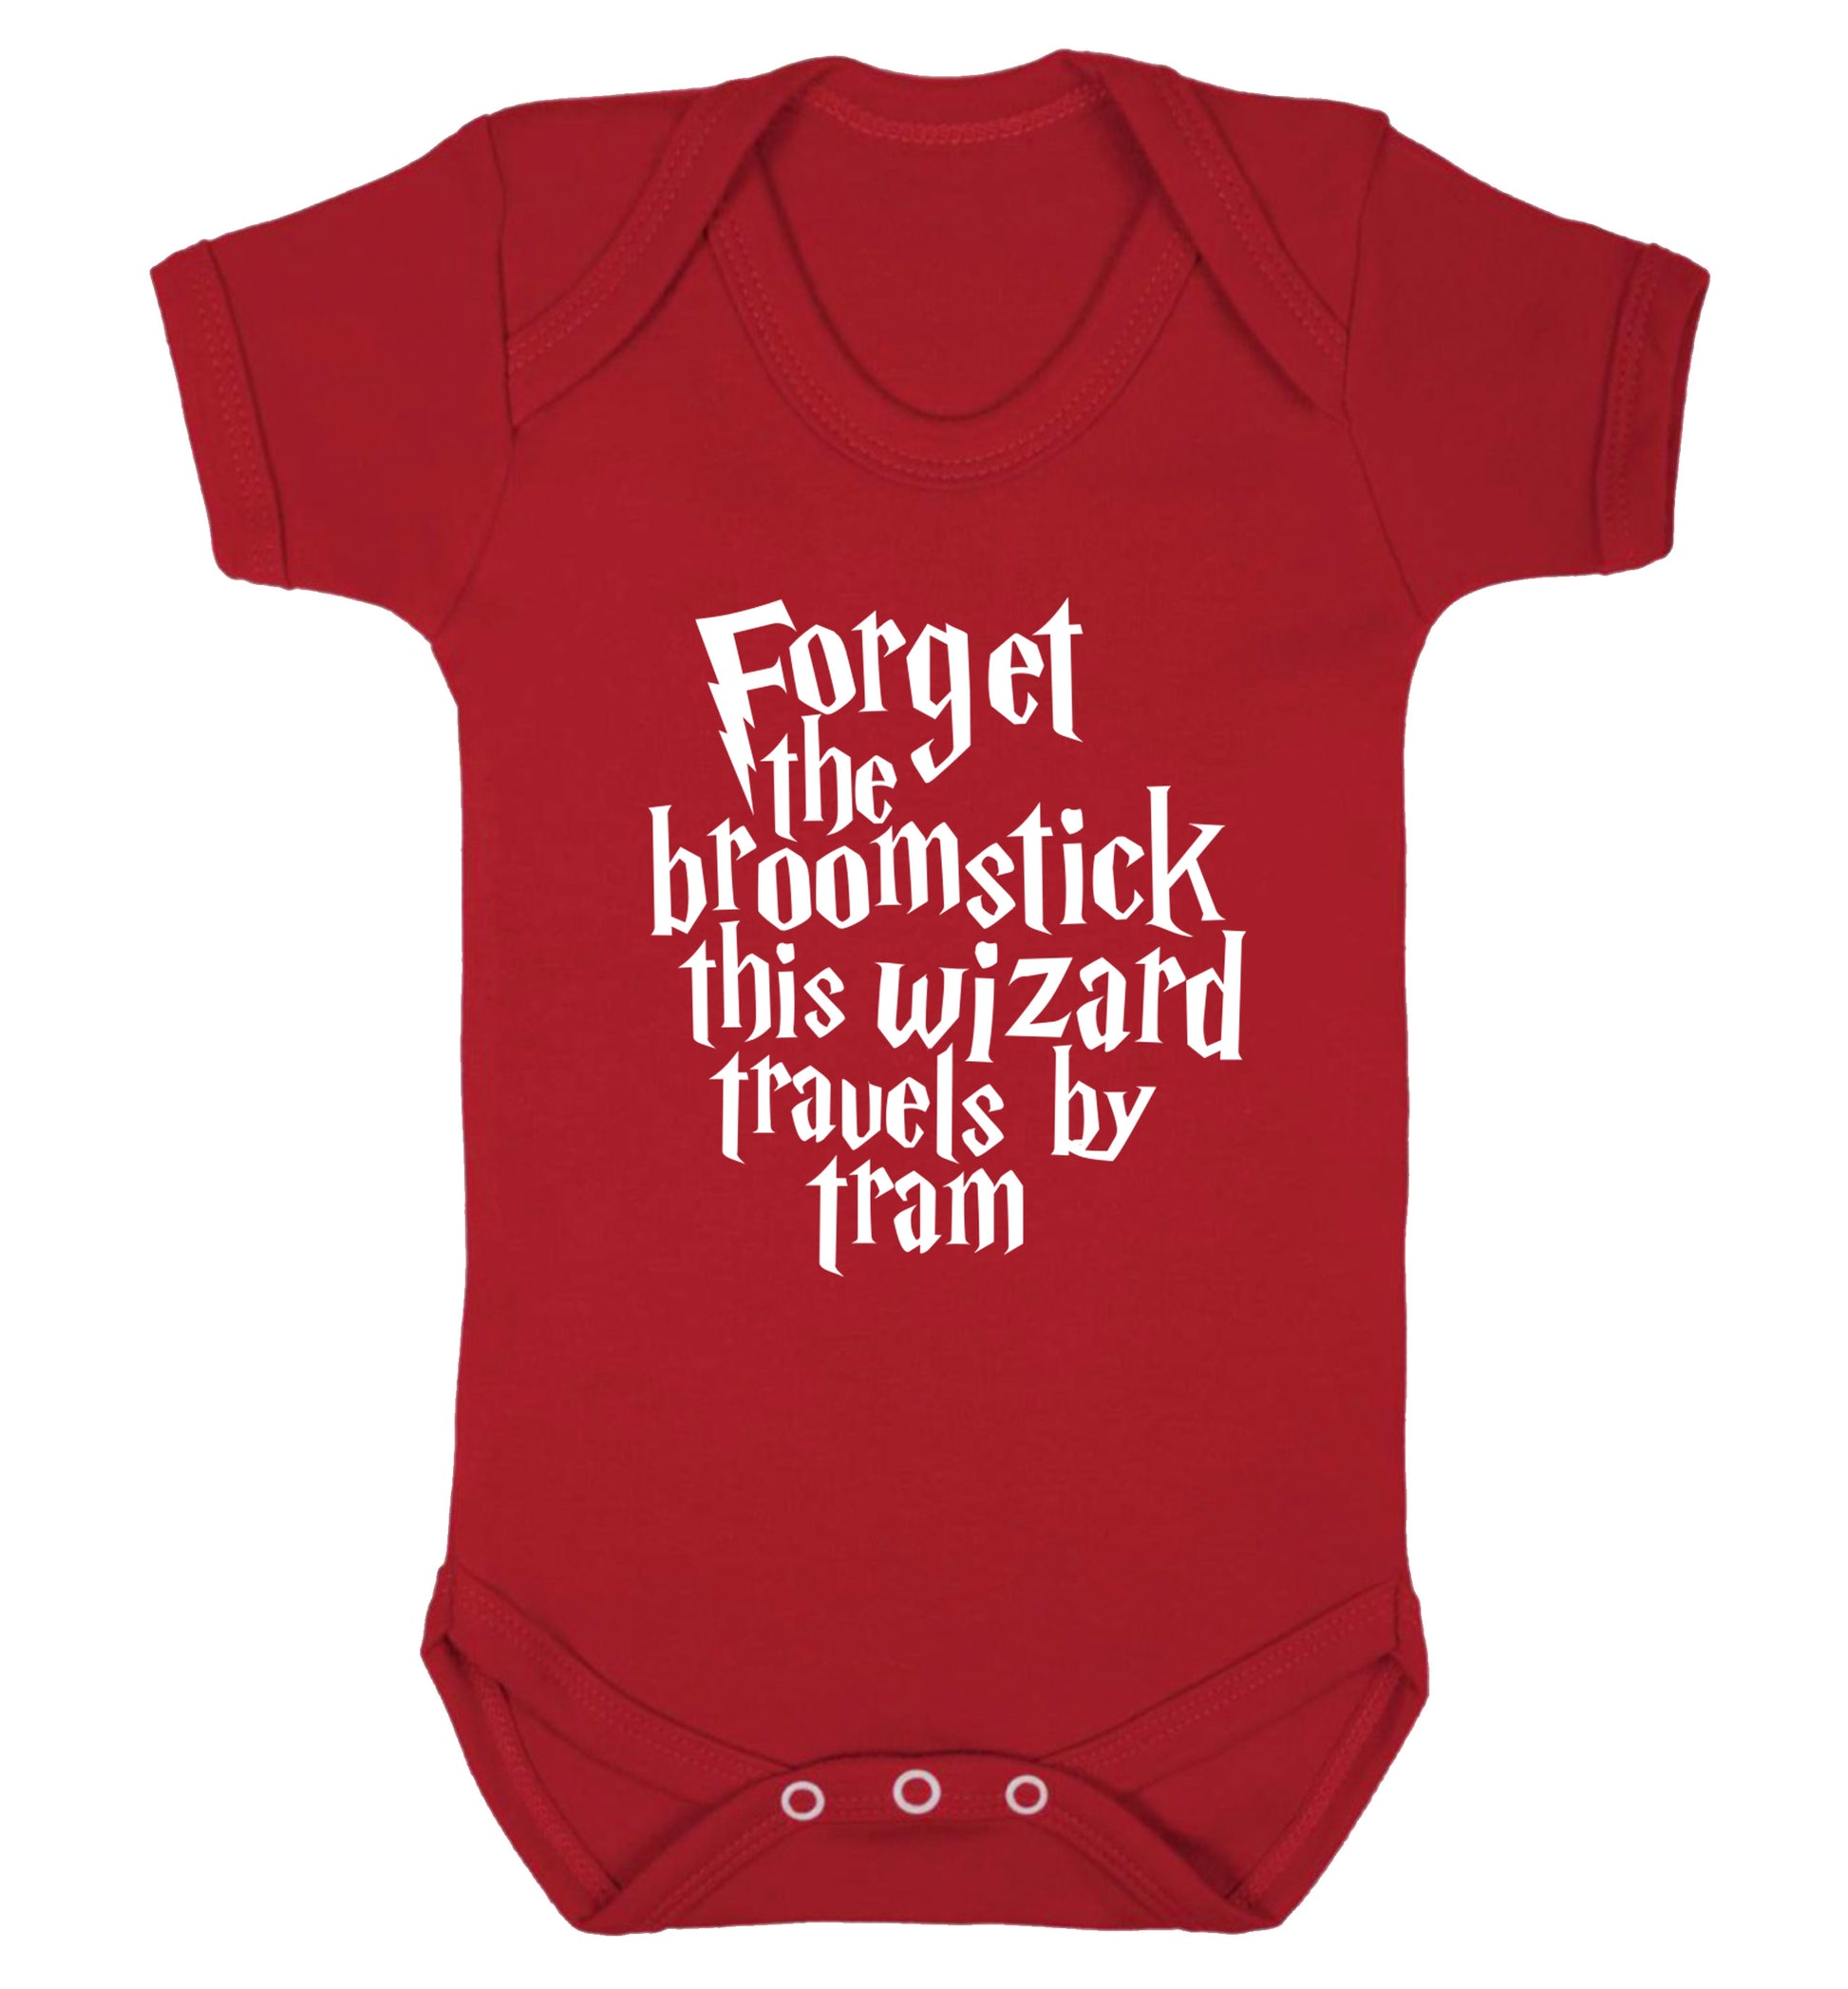 Forget the broomstick this wizard travels by tram Baby Vest red 18-24 months